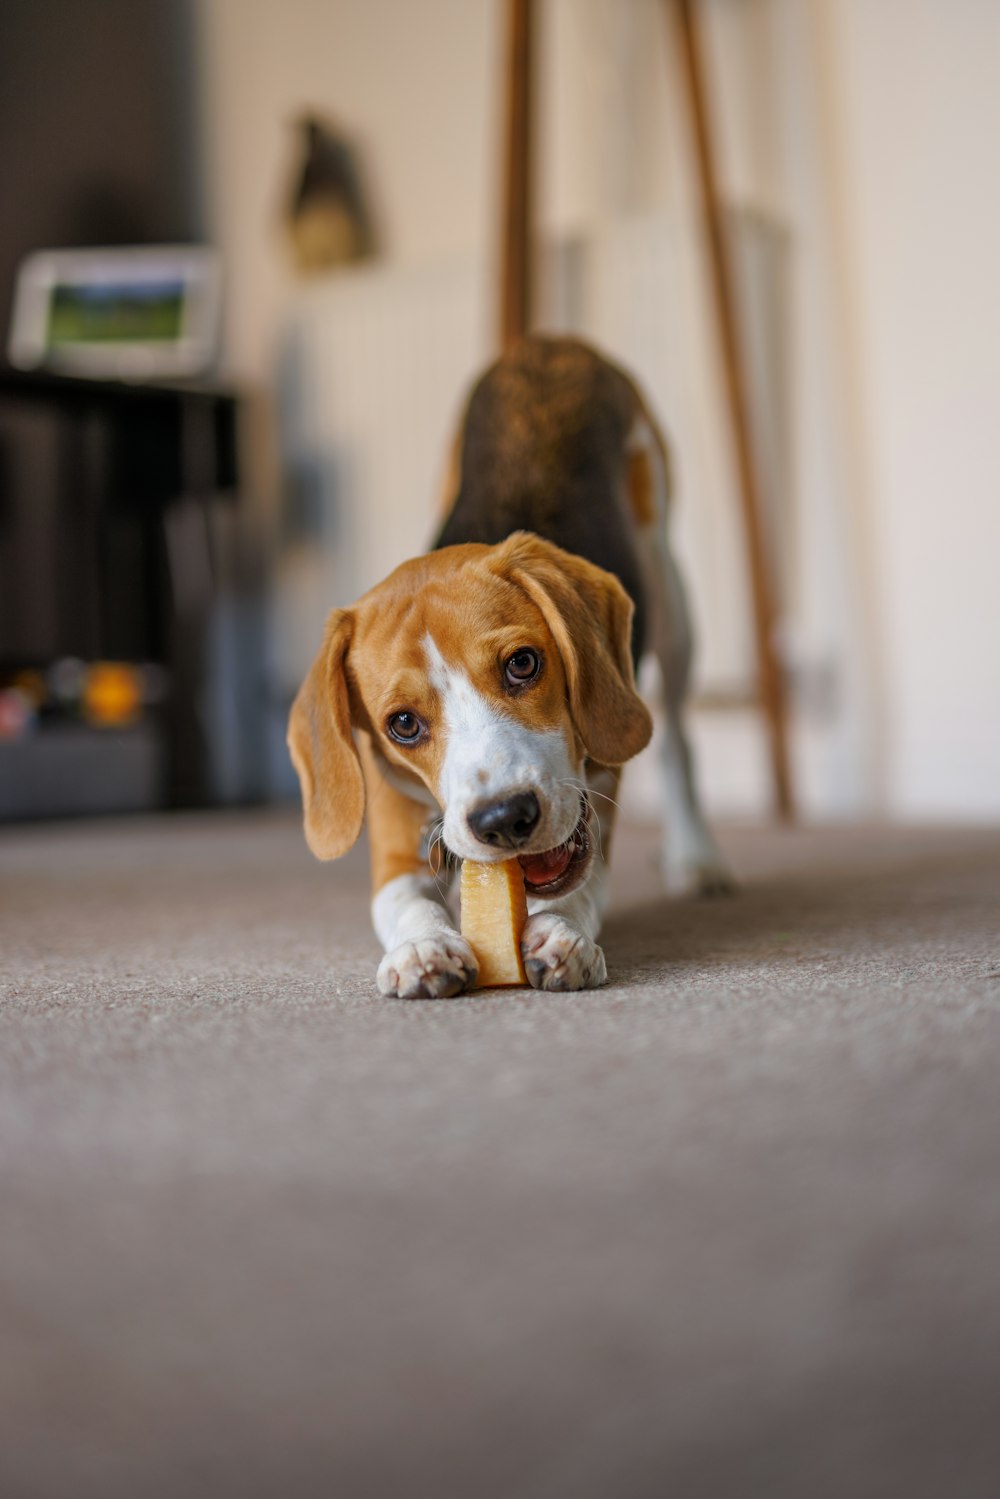 a beagle puppy chewing on a bone toy